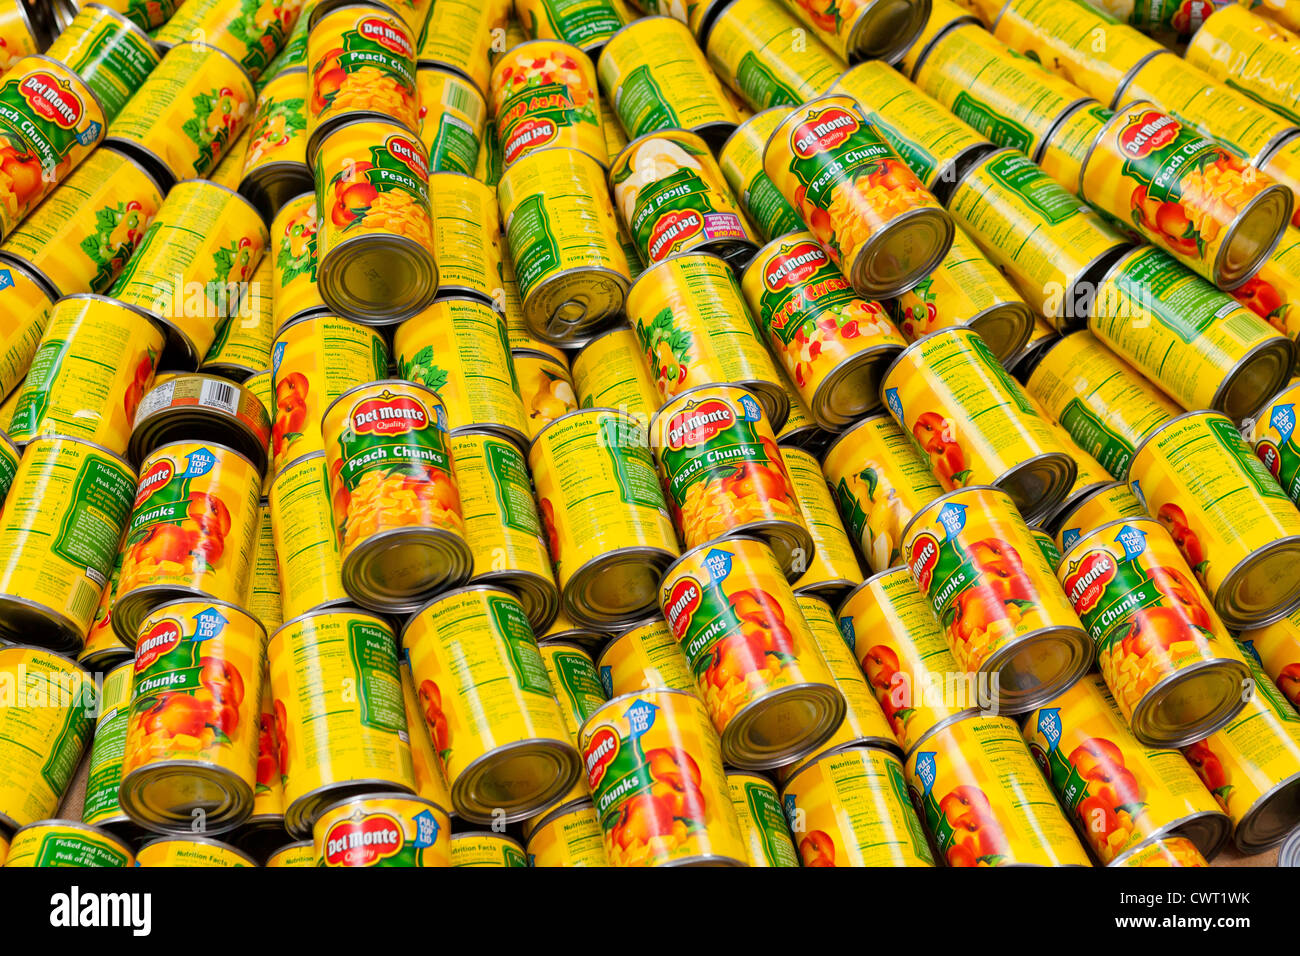 Del Monte Canned Peach Chunks stack Stock Photo